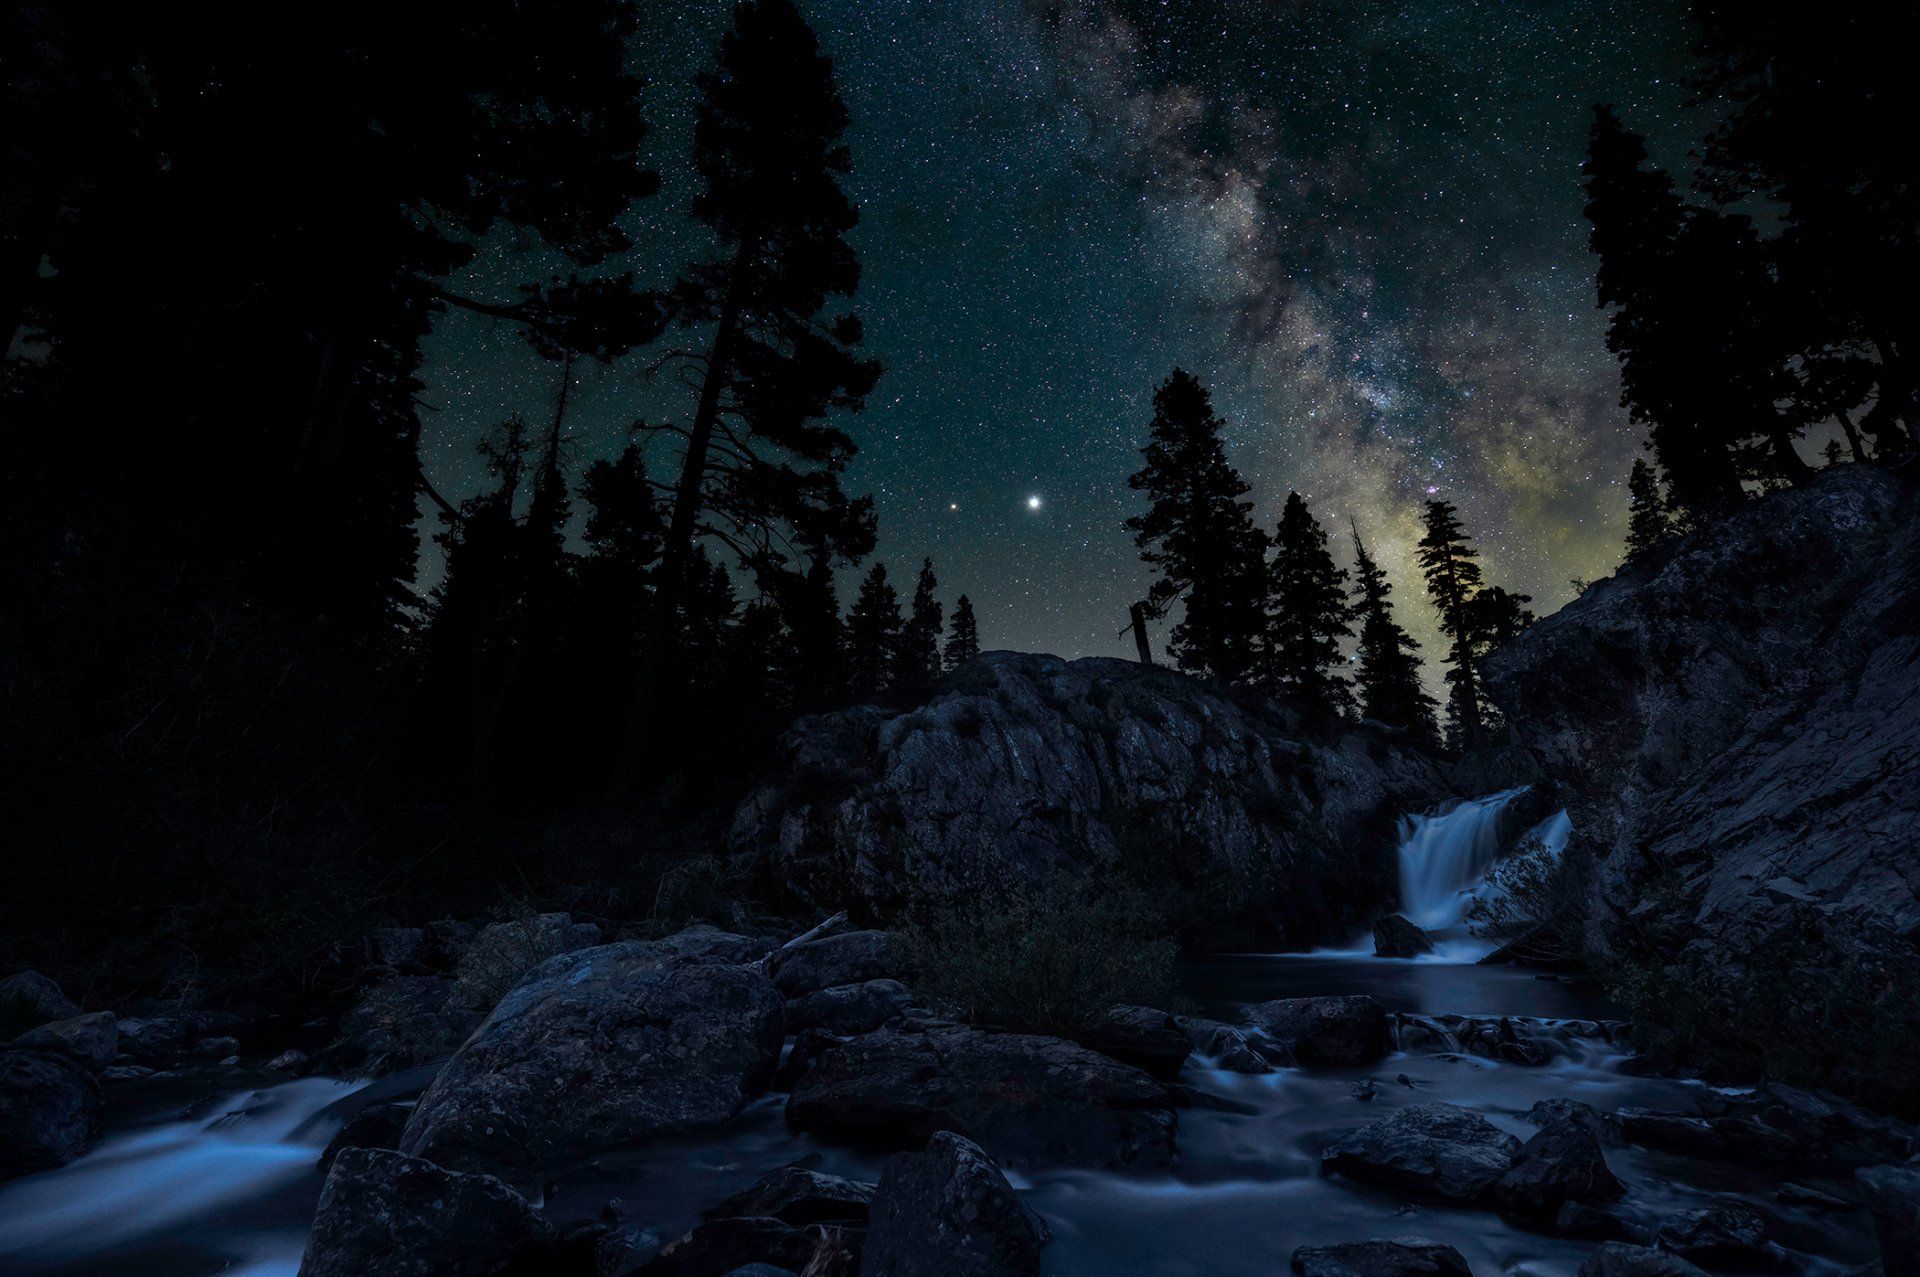 The Milky Way above Graeagle Falls in Northern California. Saturn and Jupiter are the two bright stars in the center. (Two image composite)